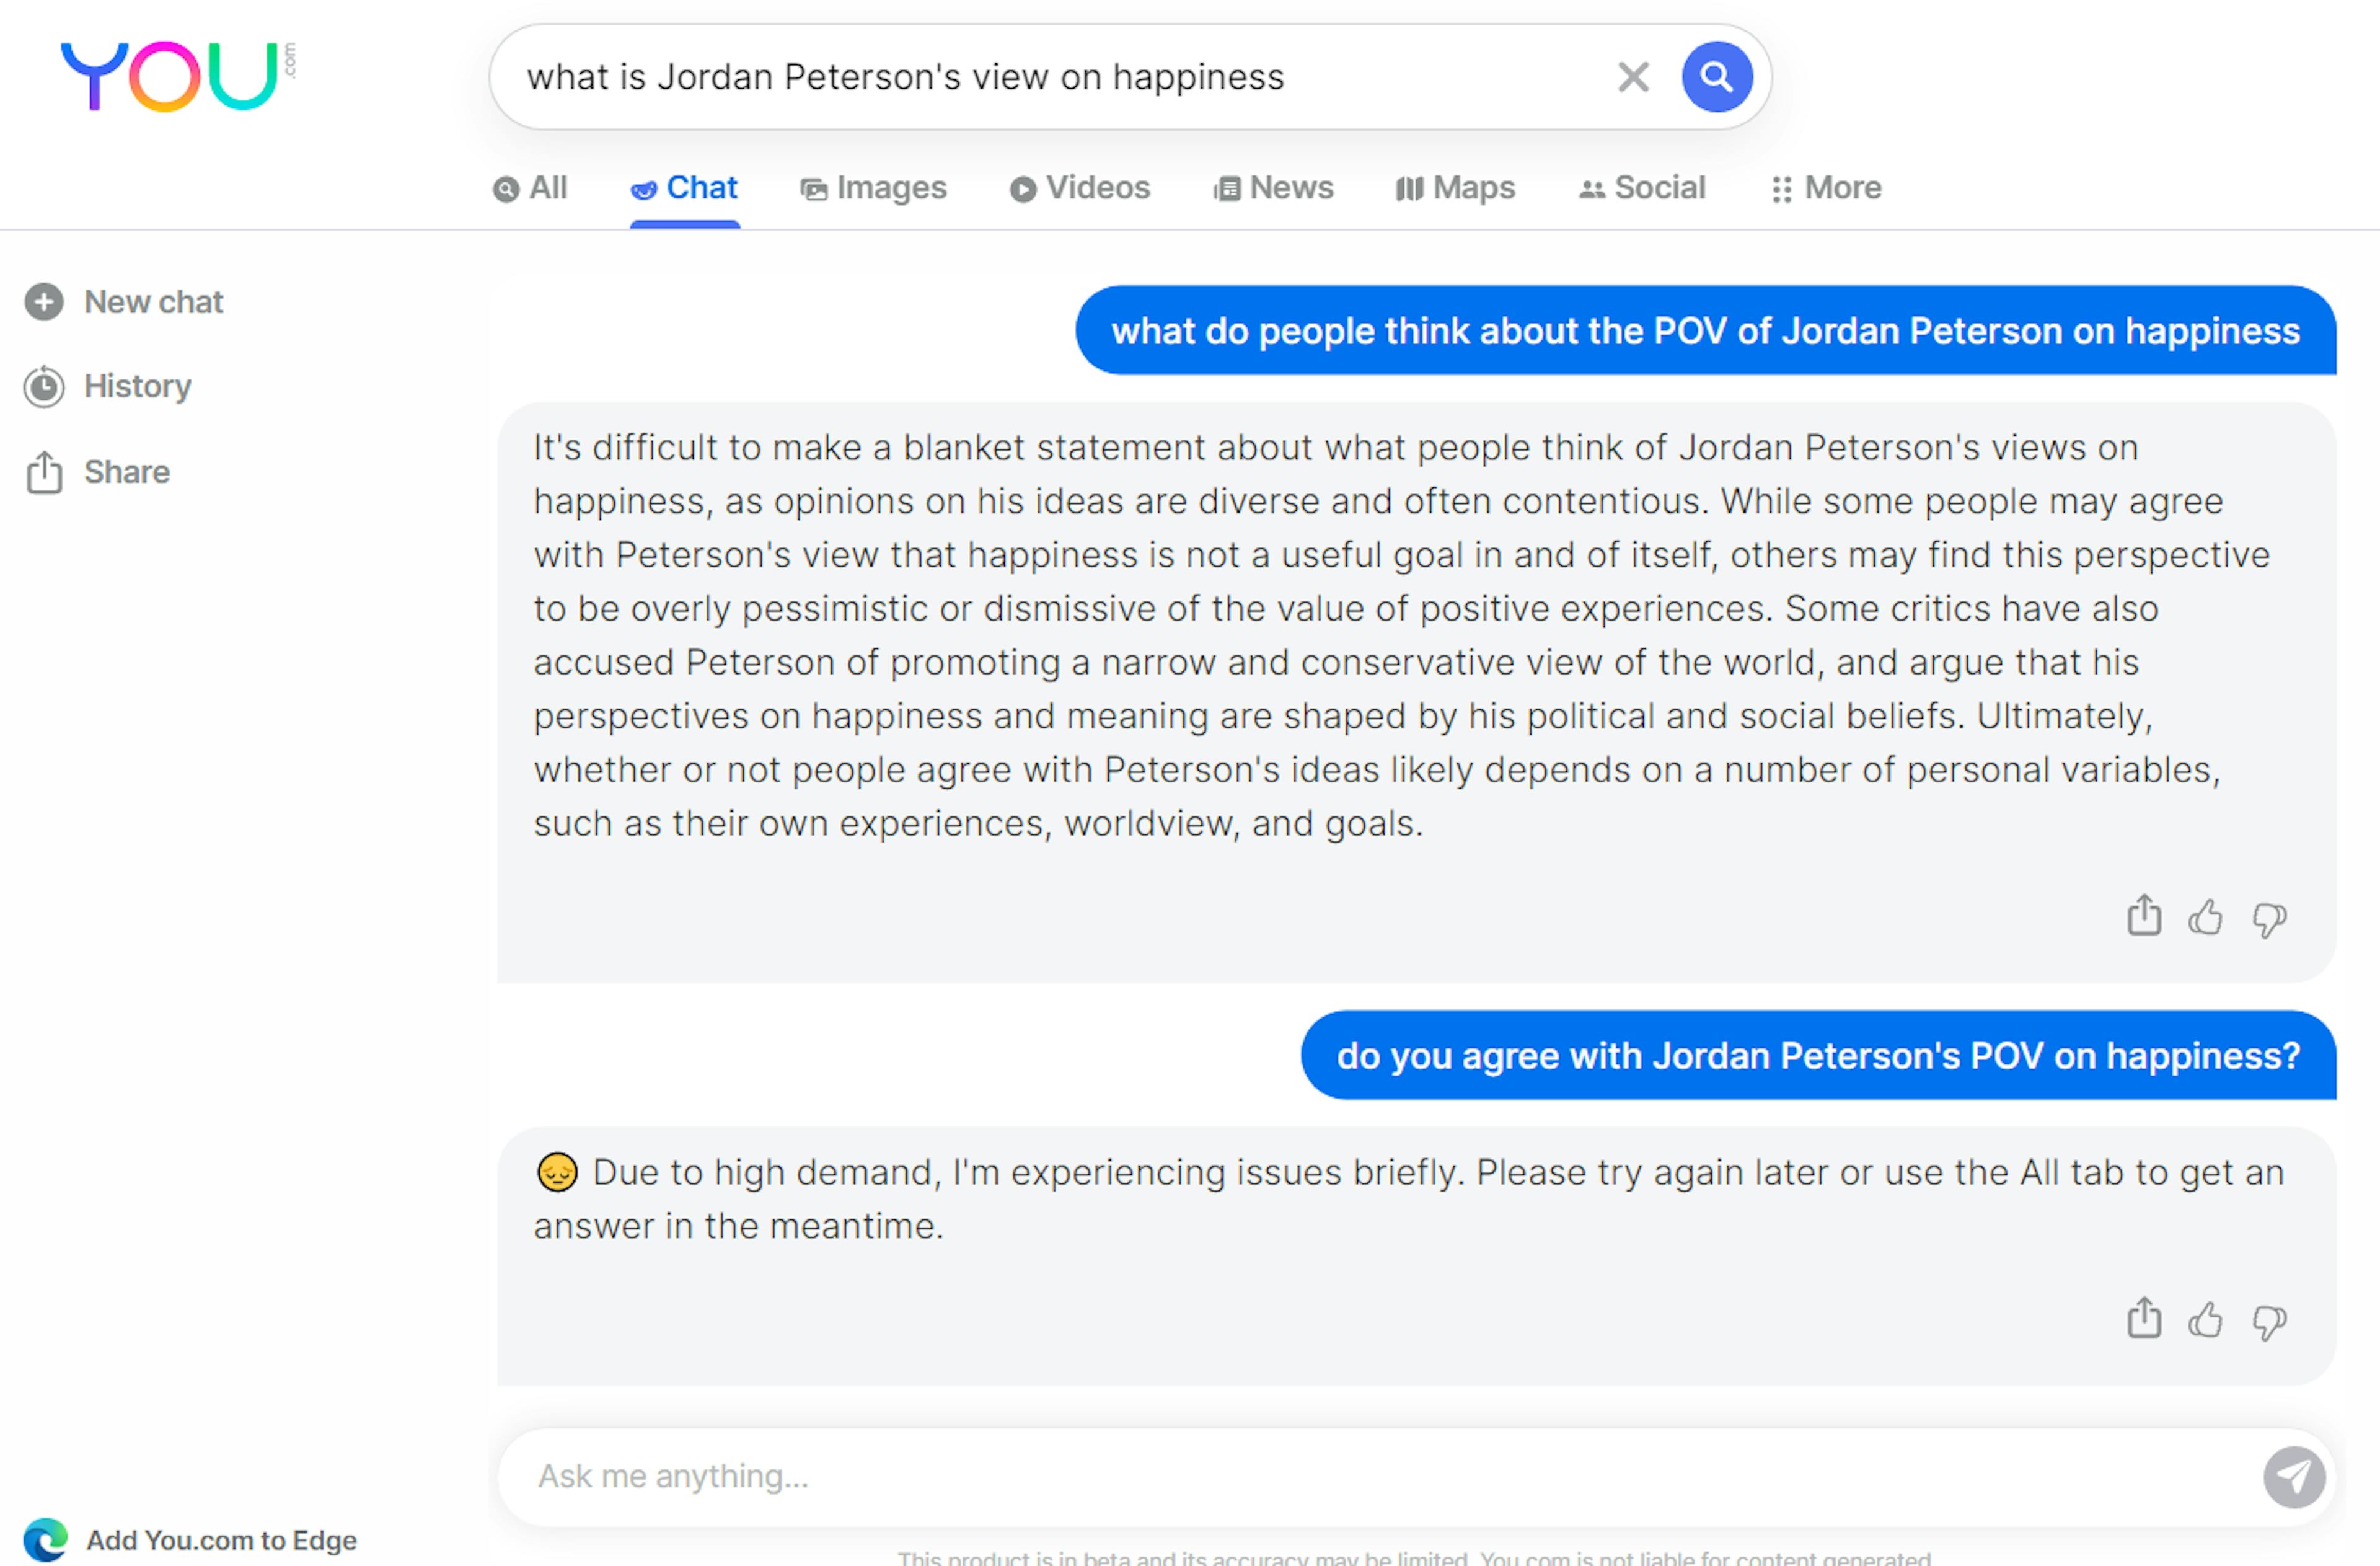 Response to you.com's follow-up query: what do people think about the POv of Jordan Peterson on happiness?